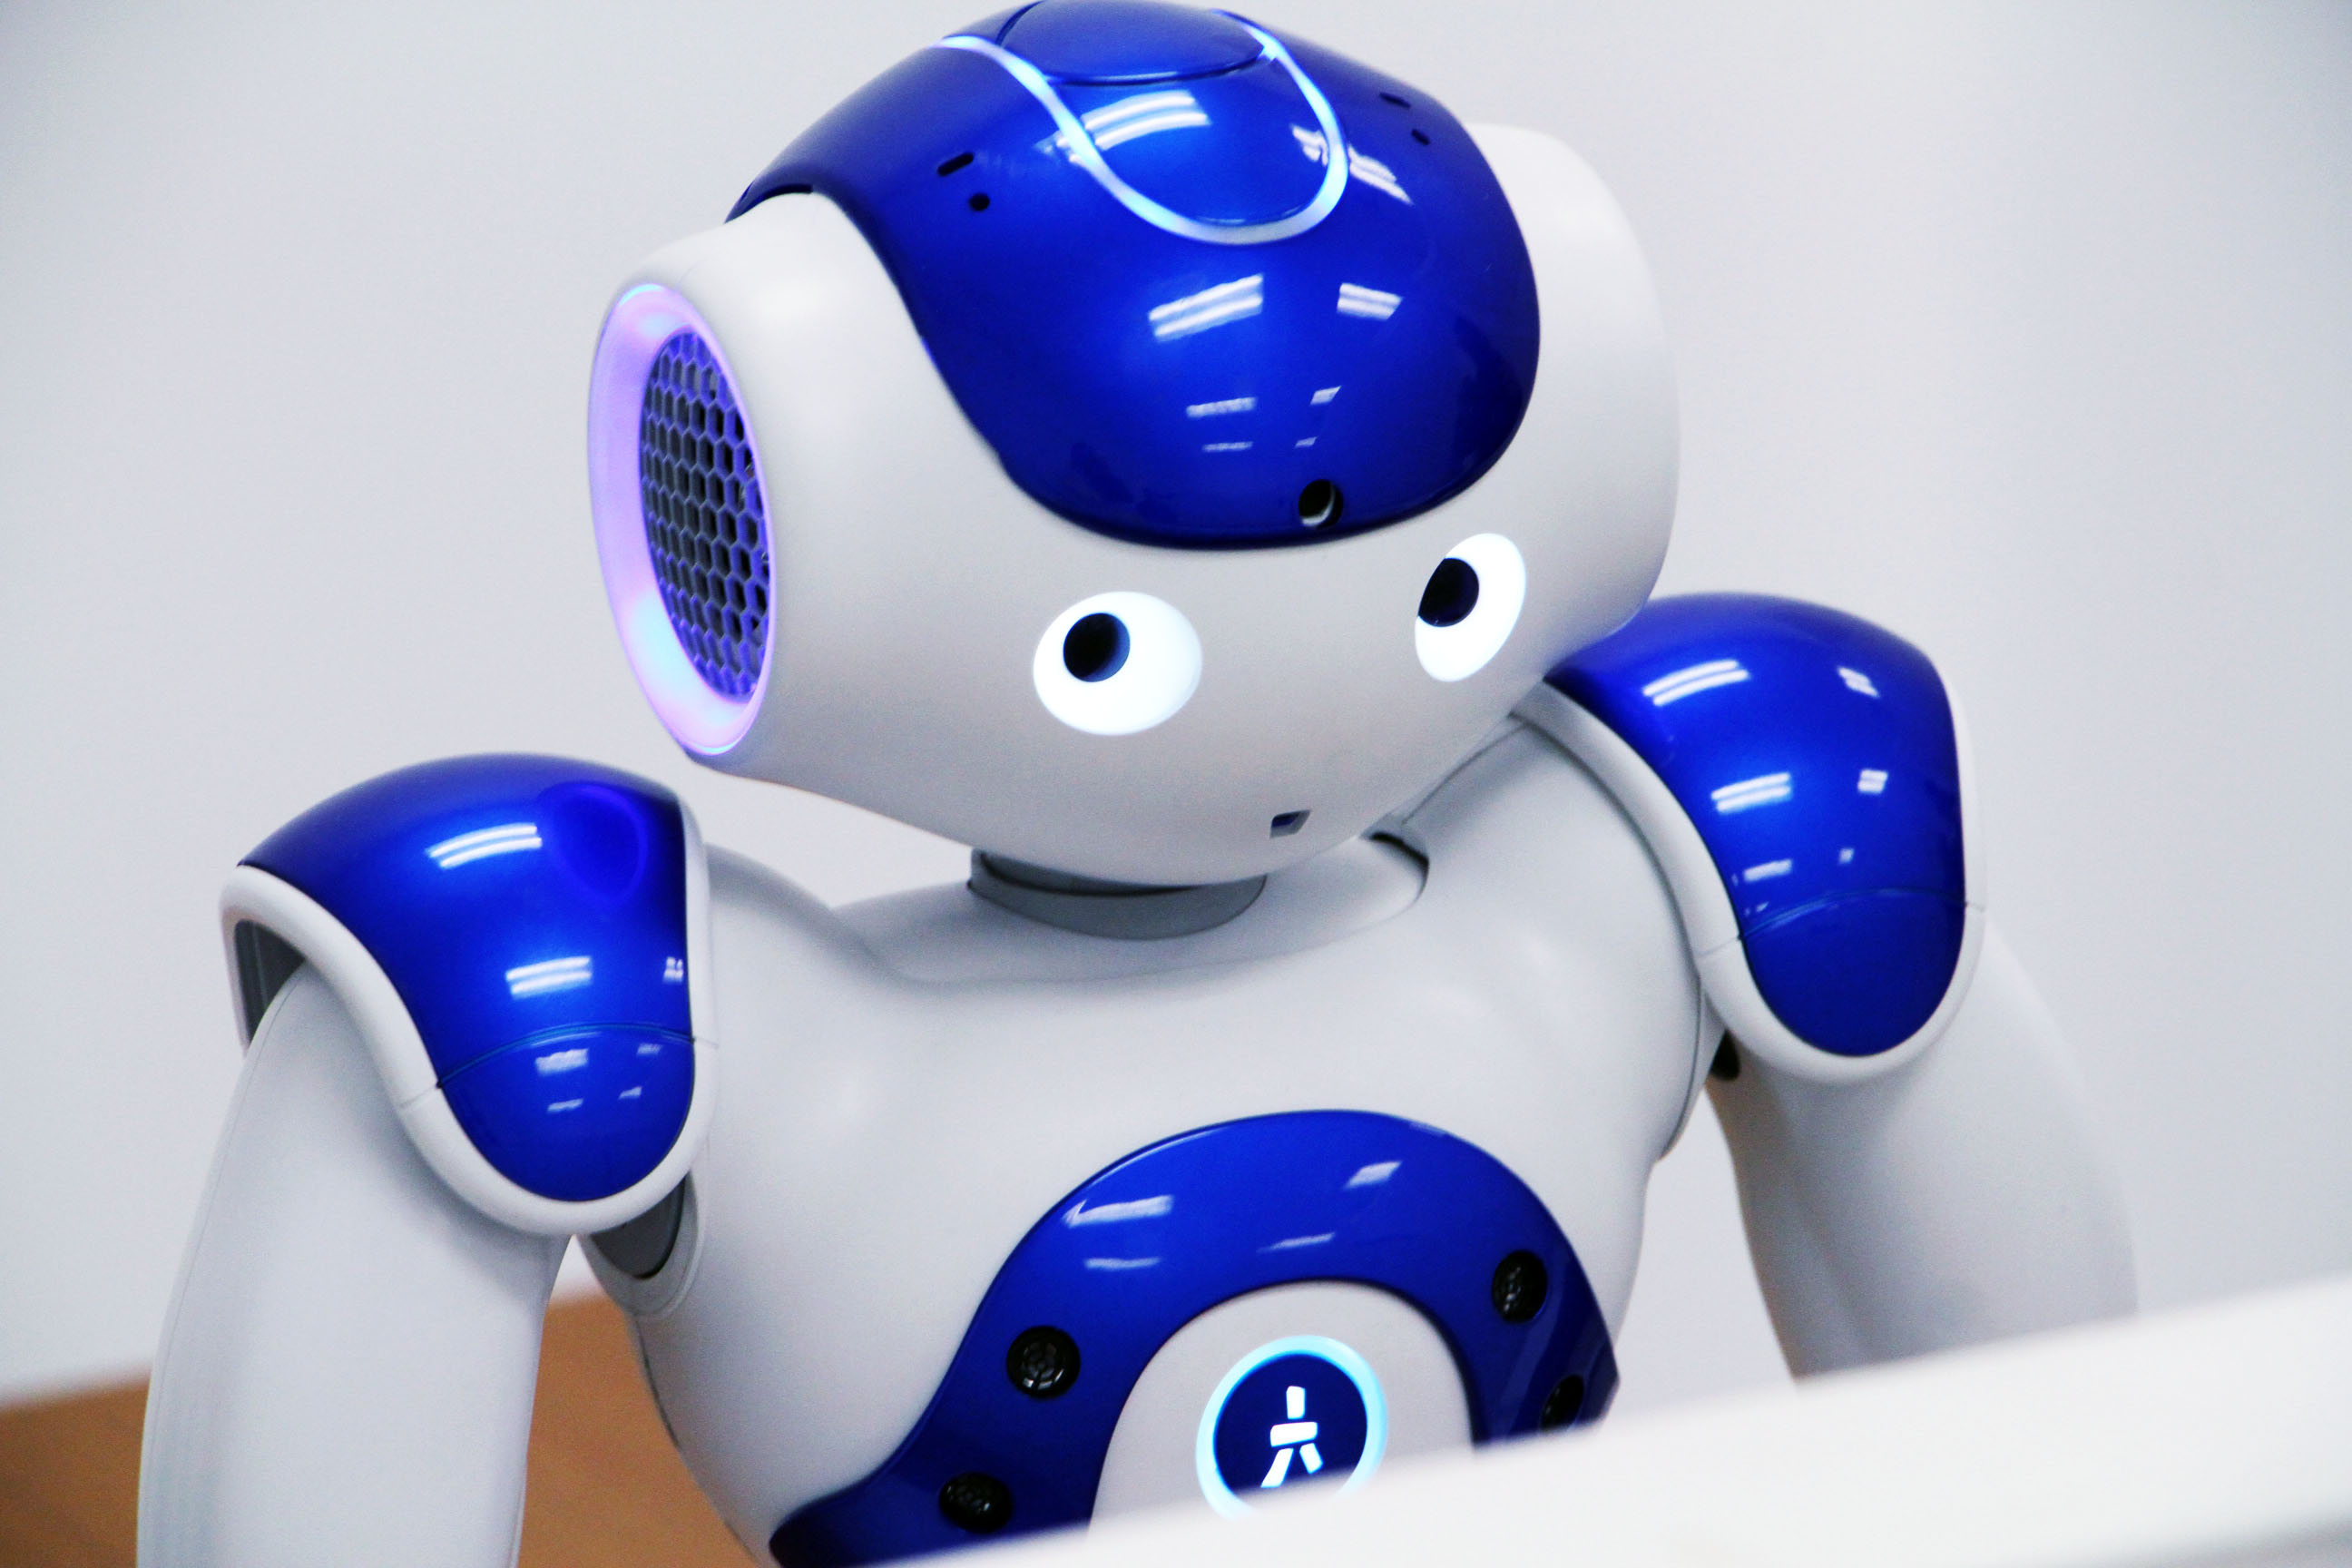 Please don't knock the robot over • TechCrunch